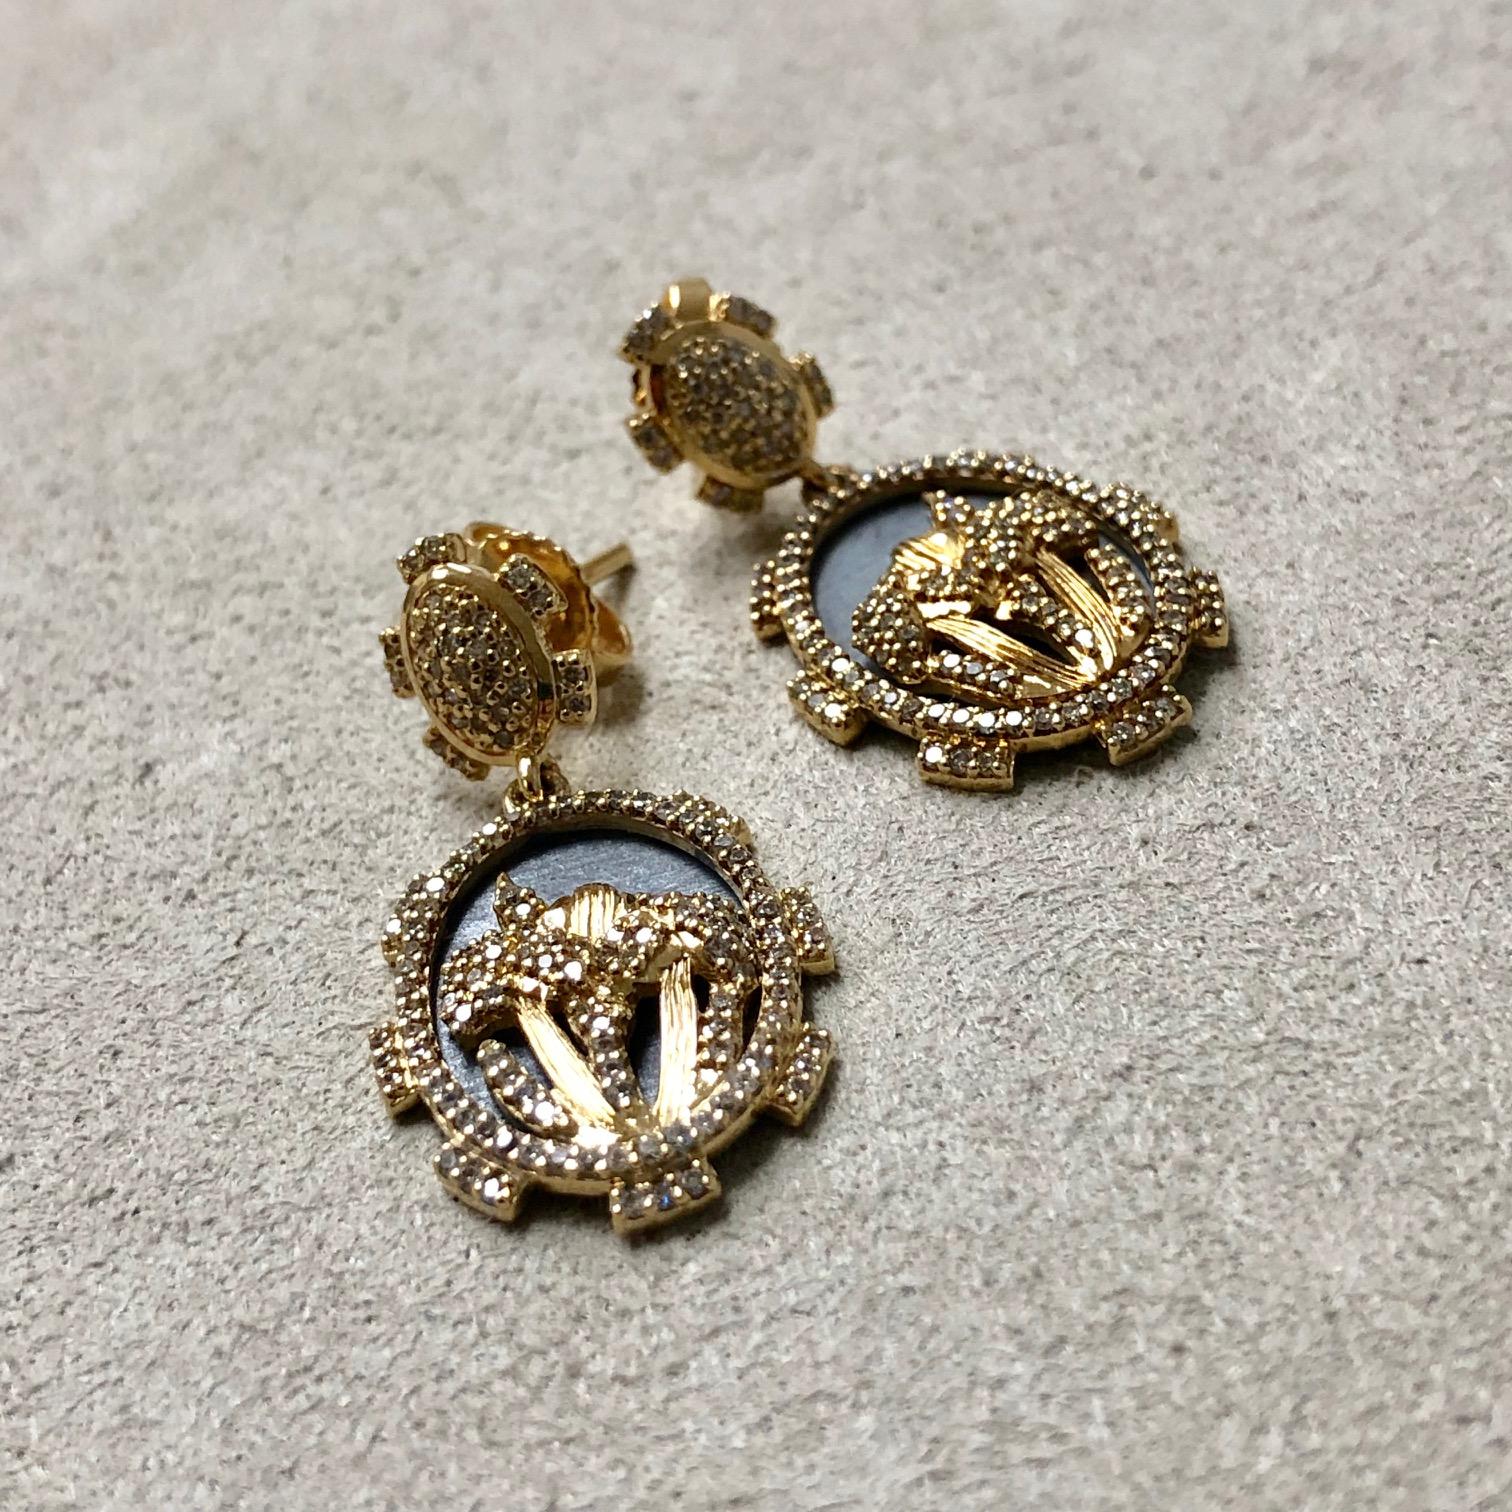 Syna Yellow Gold & Oxidized Silver Iris Flower Earrings with Champagne Diamonds 4